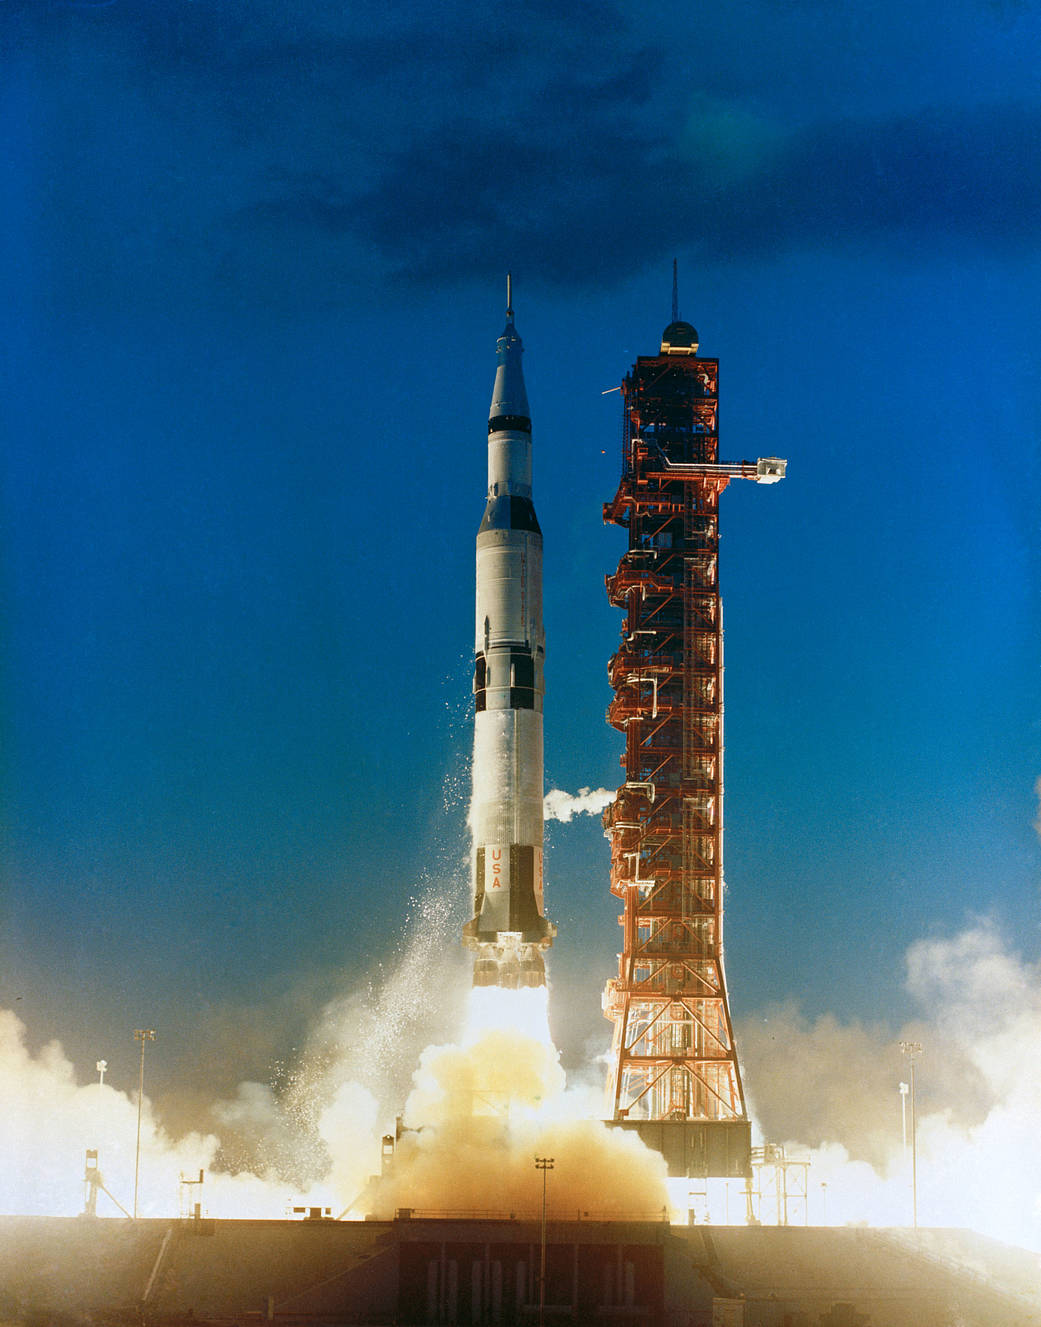 The Apollo 4 (Spacecraft 017/Saturn 501) space mission was launched from Pad A, Launch Complex 39, Kennedy Space Center, Florida